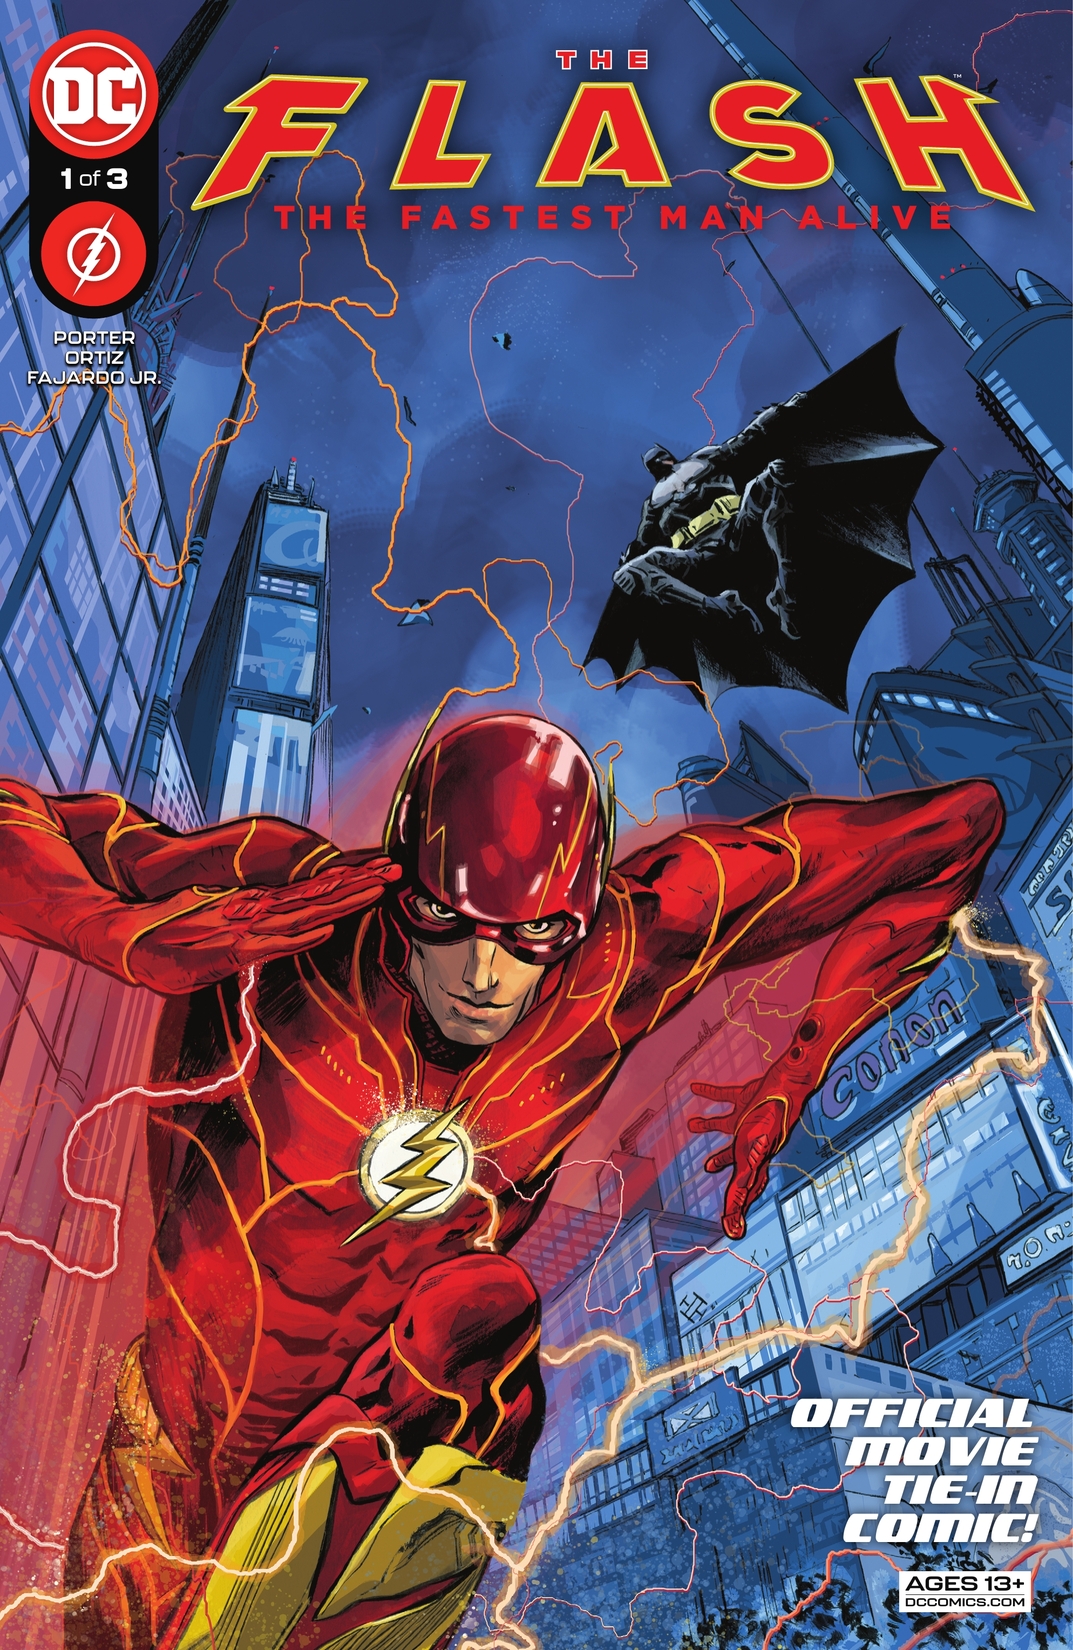 The Flash: The Fastest Man Alive #1 preview images